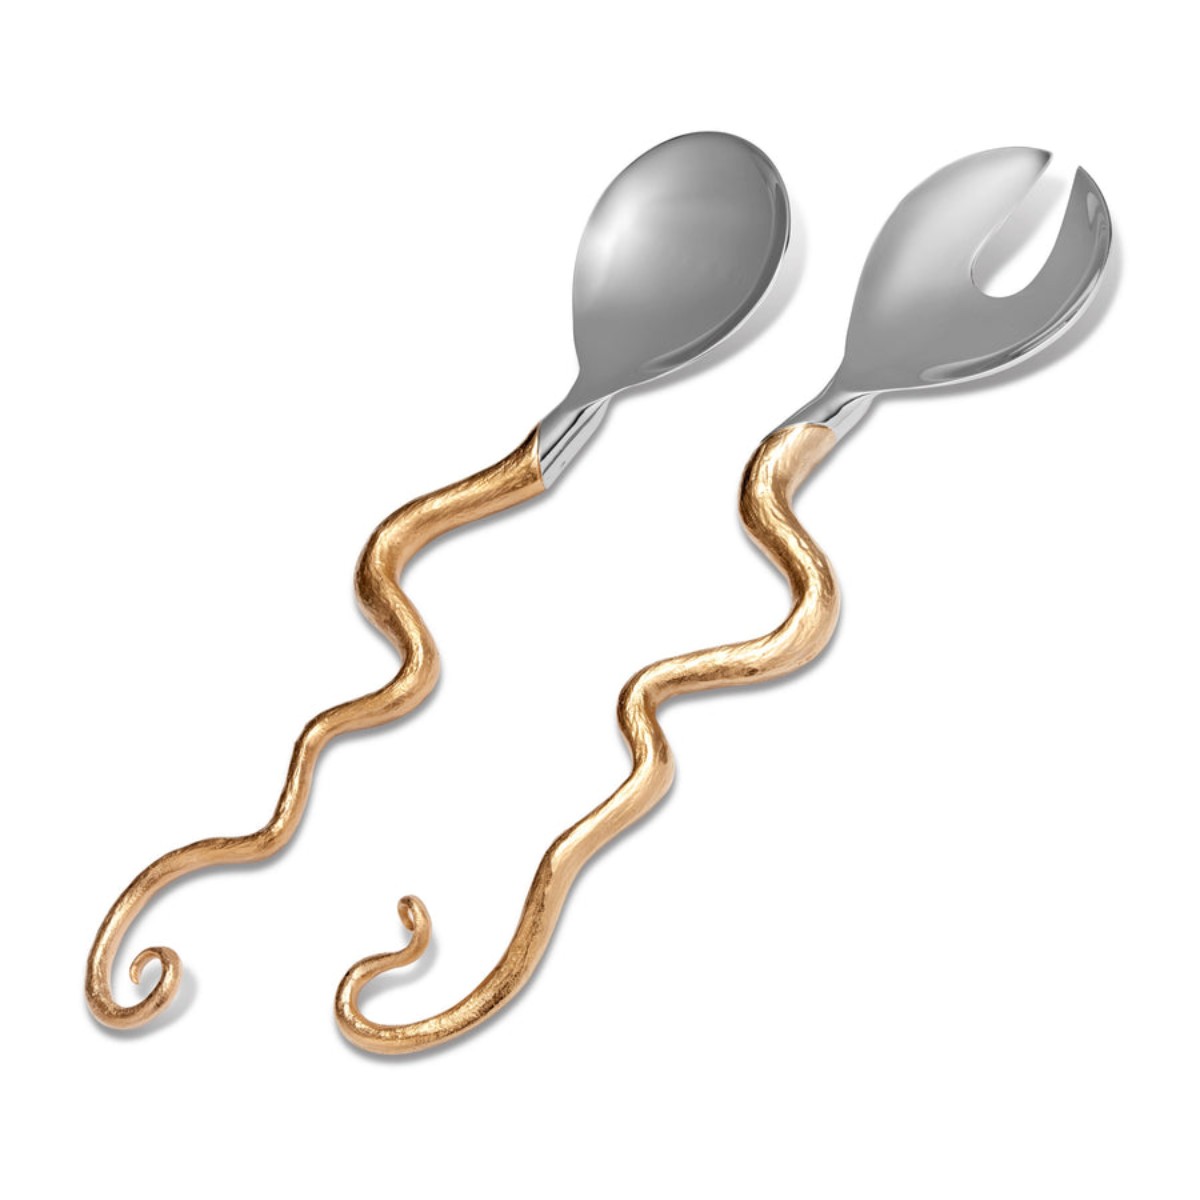 L’Objet | HAAS Brothers | Haas Twisted Horn Serving Set (2 Piece Set)